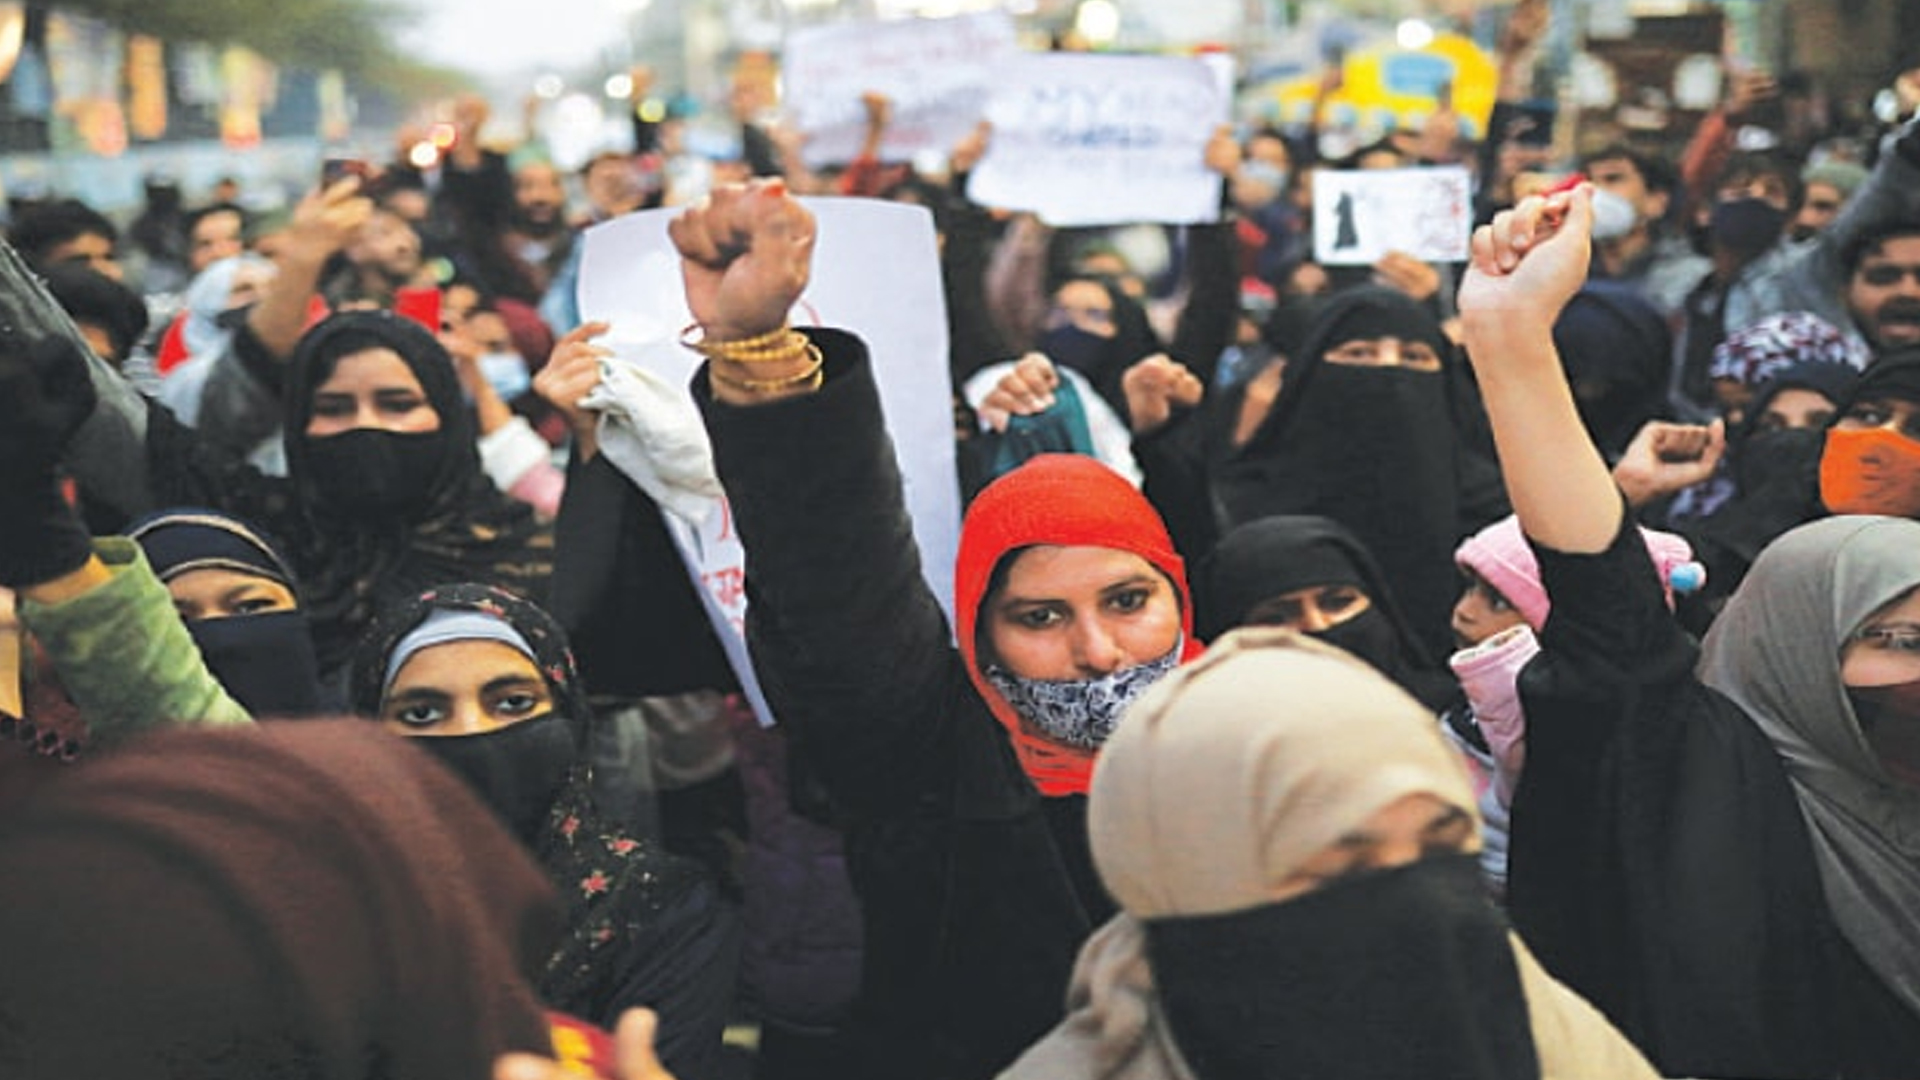 STUDENTS ARE THE HARBINGER OF CHANGE; HIJAB ROW WILL NOT END HERE